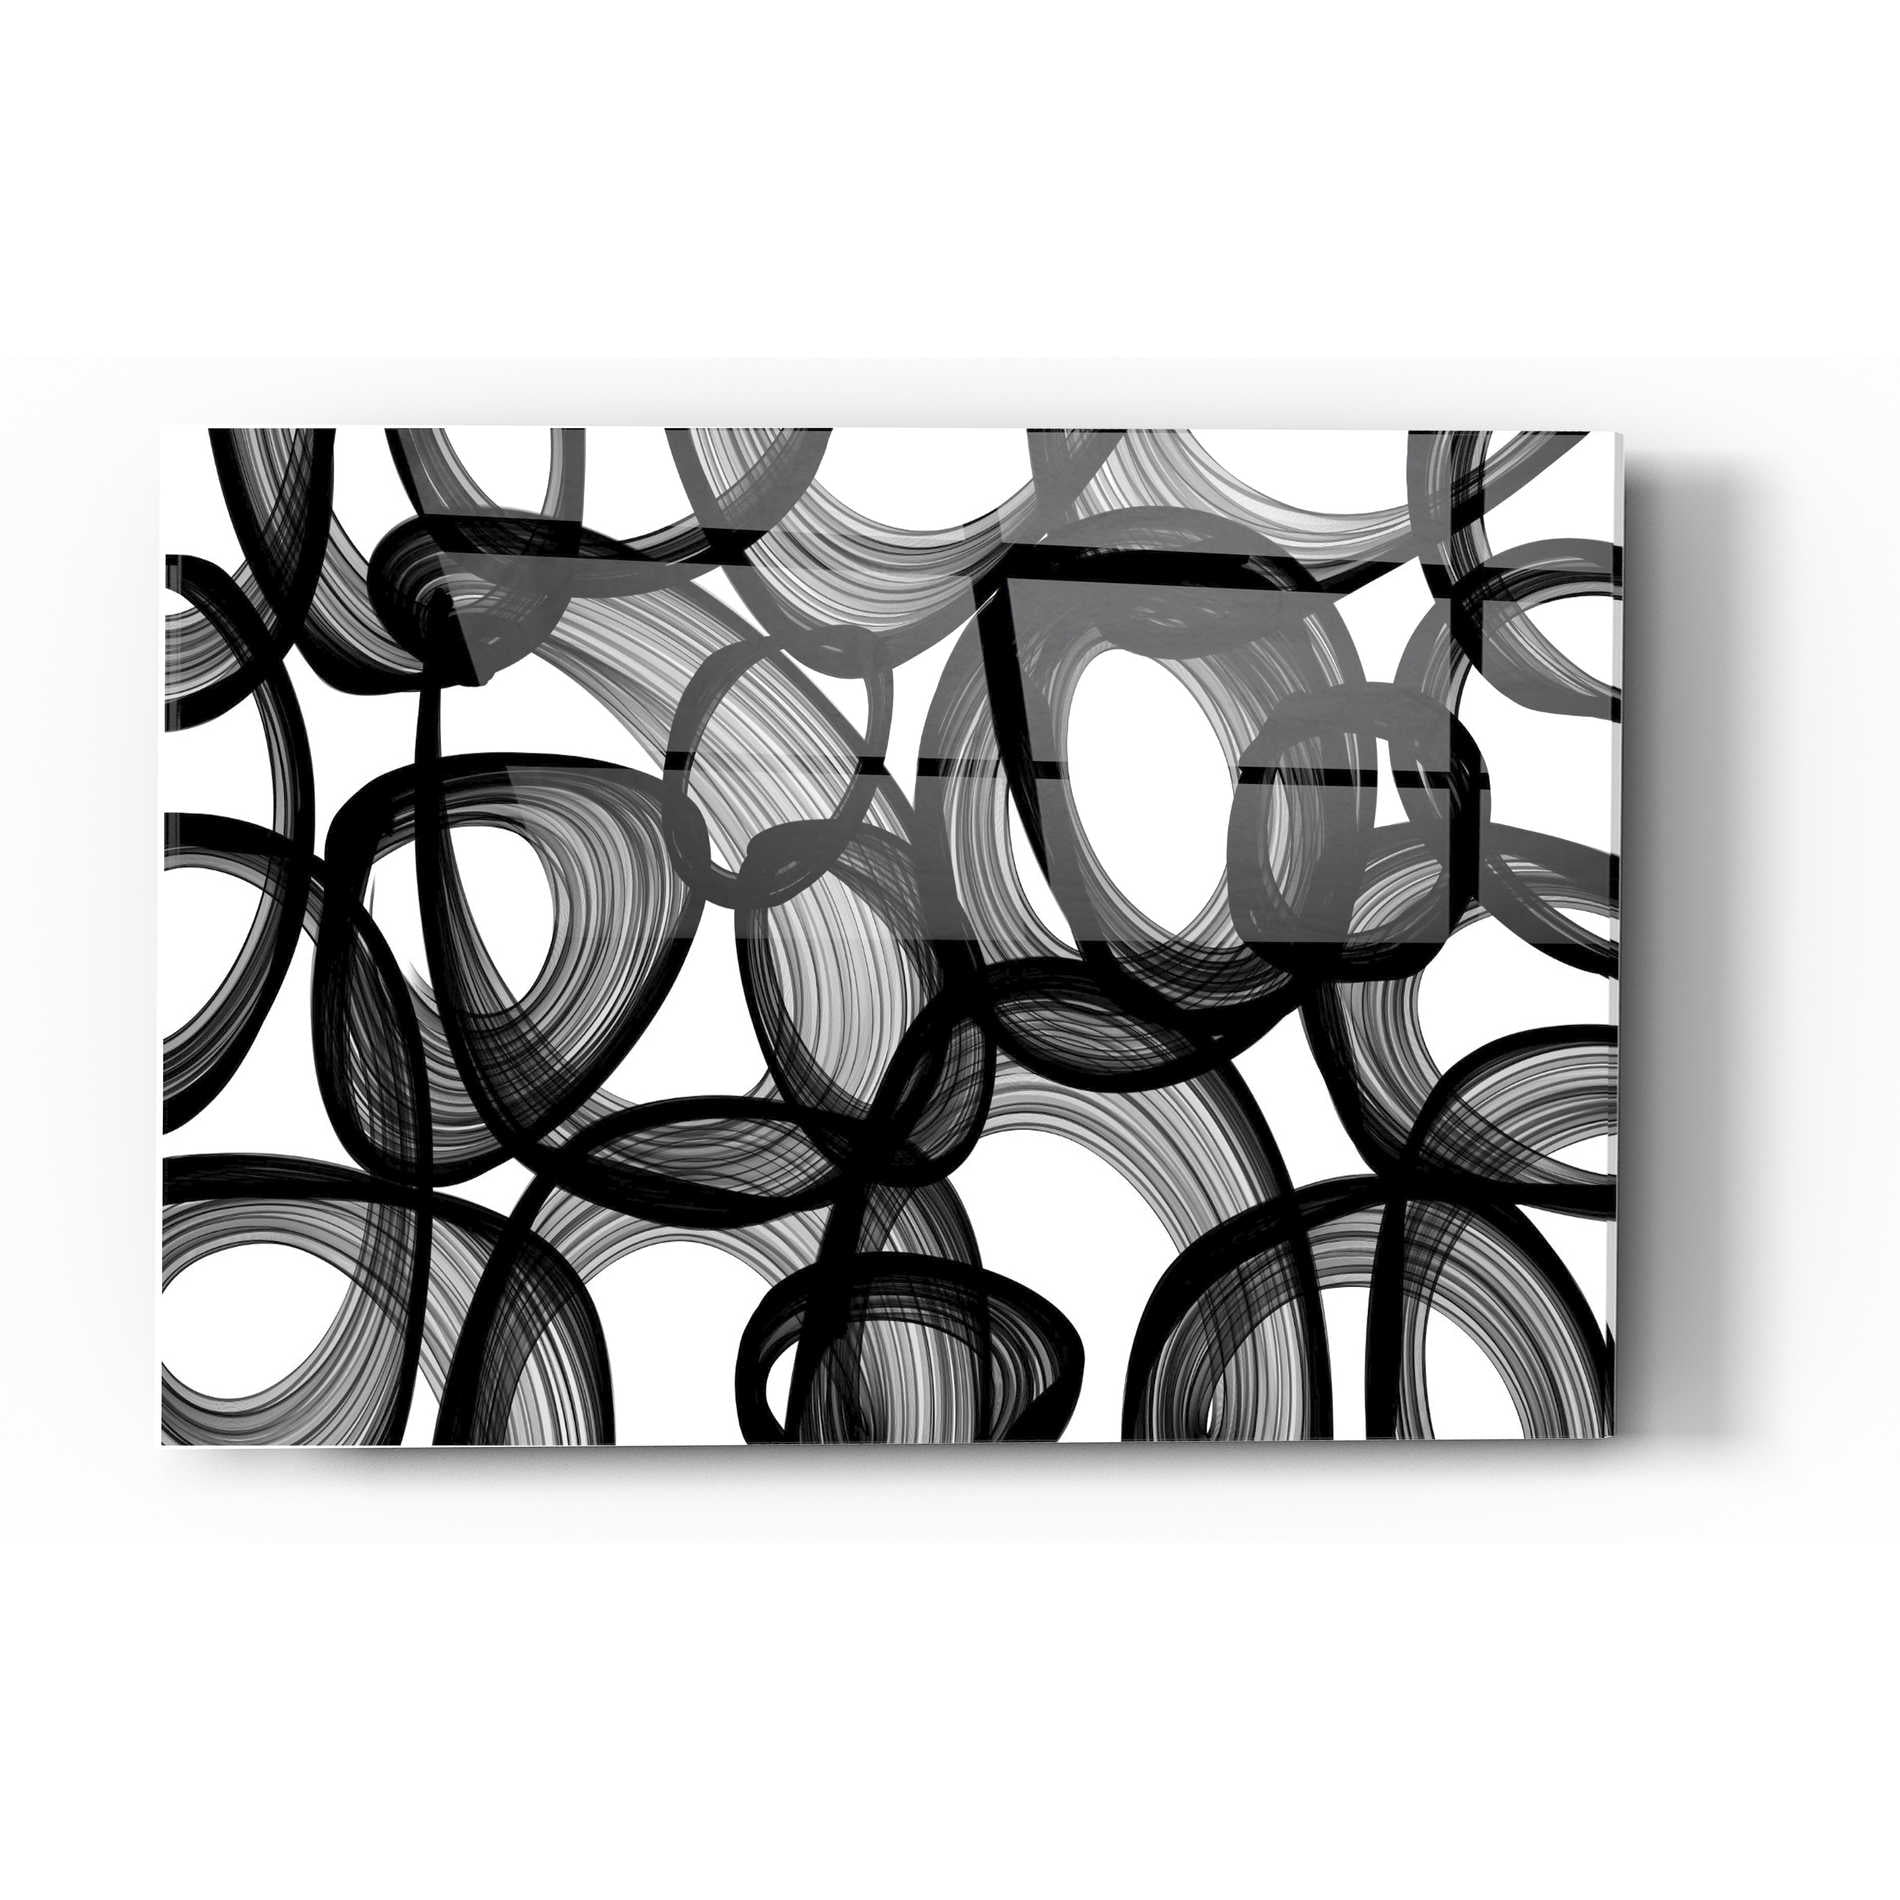 Epic Art 'Abstract Black and White 2015' by Irena Orlov, Acrylic Glass Wall Art,12x16